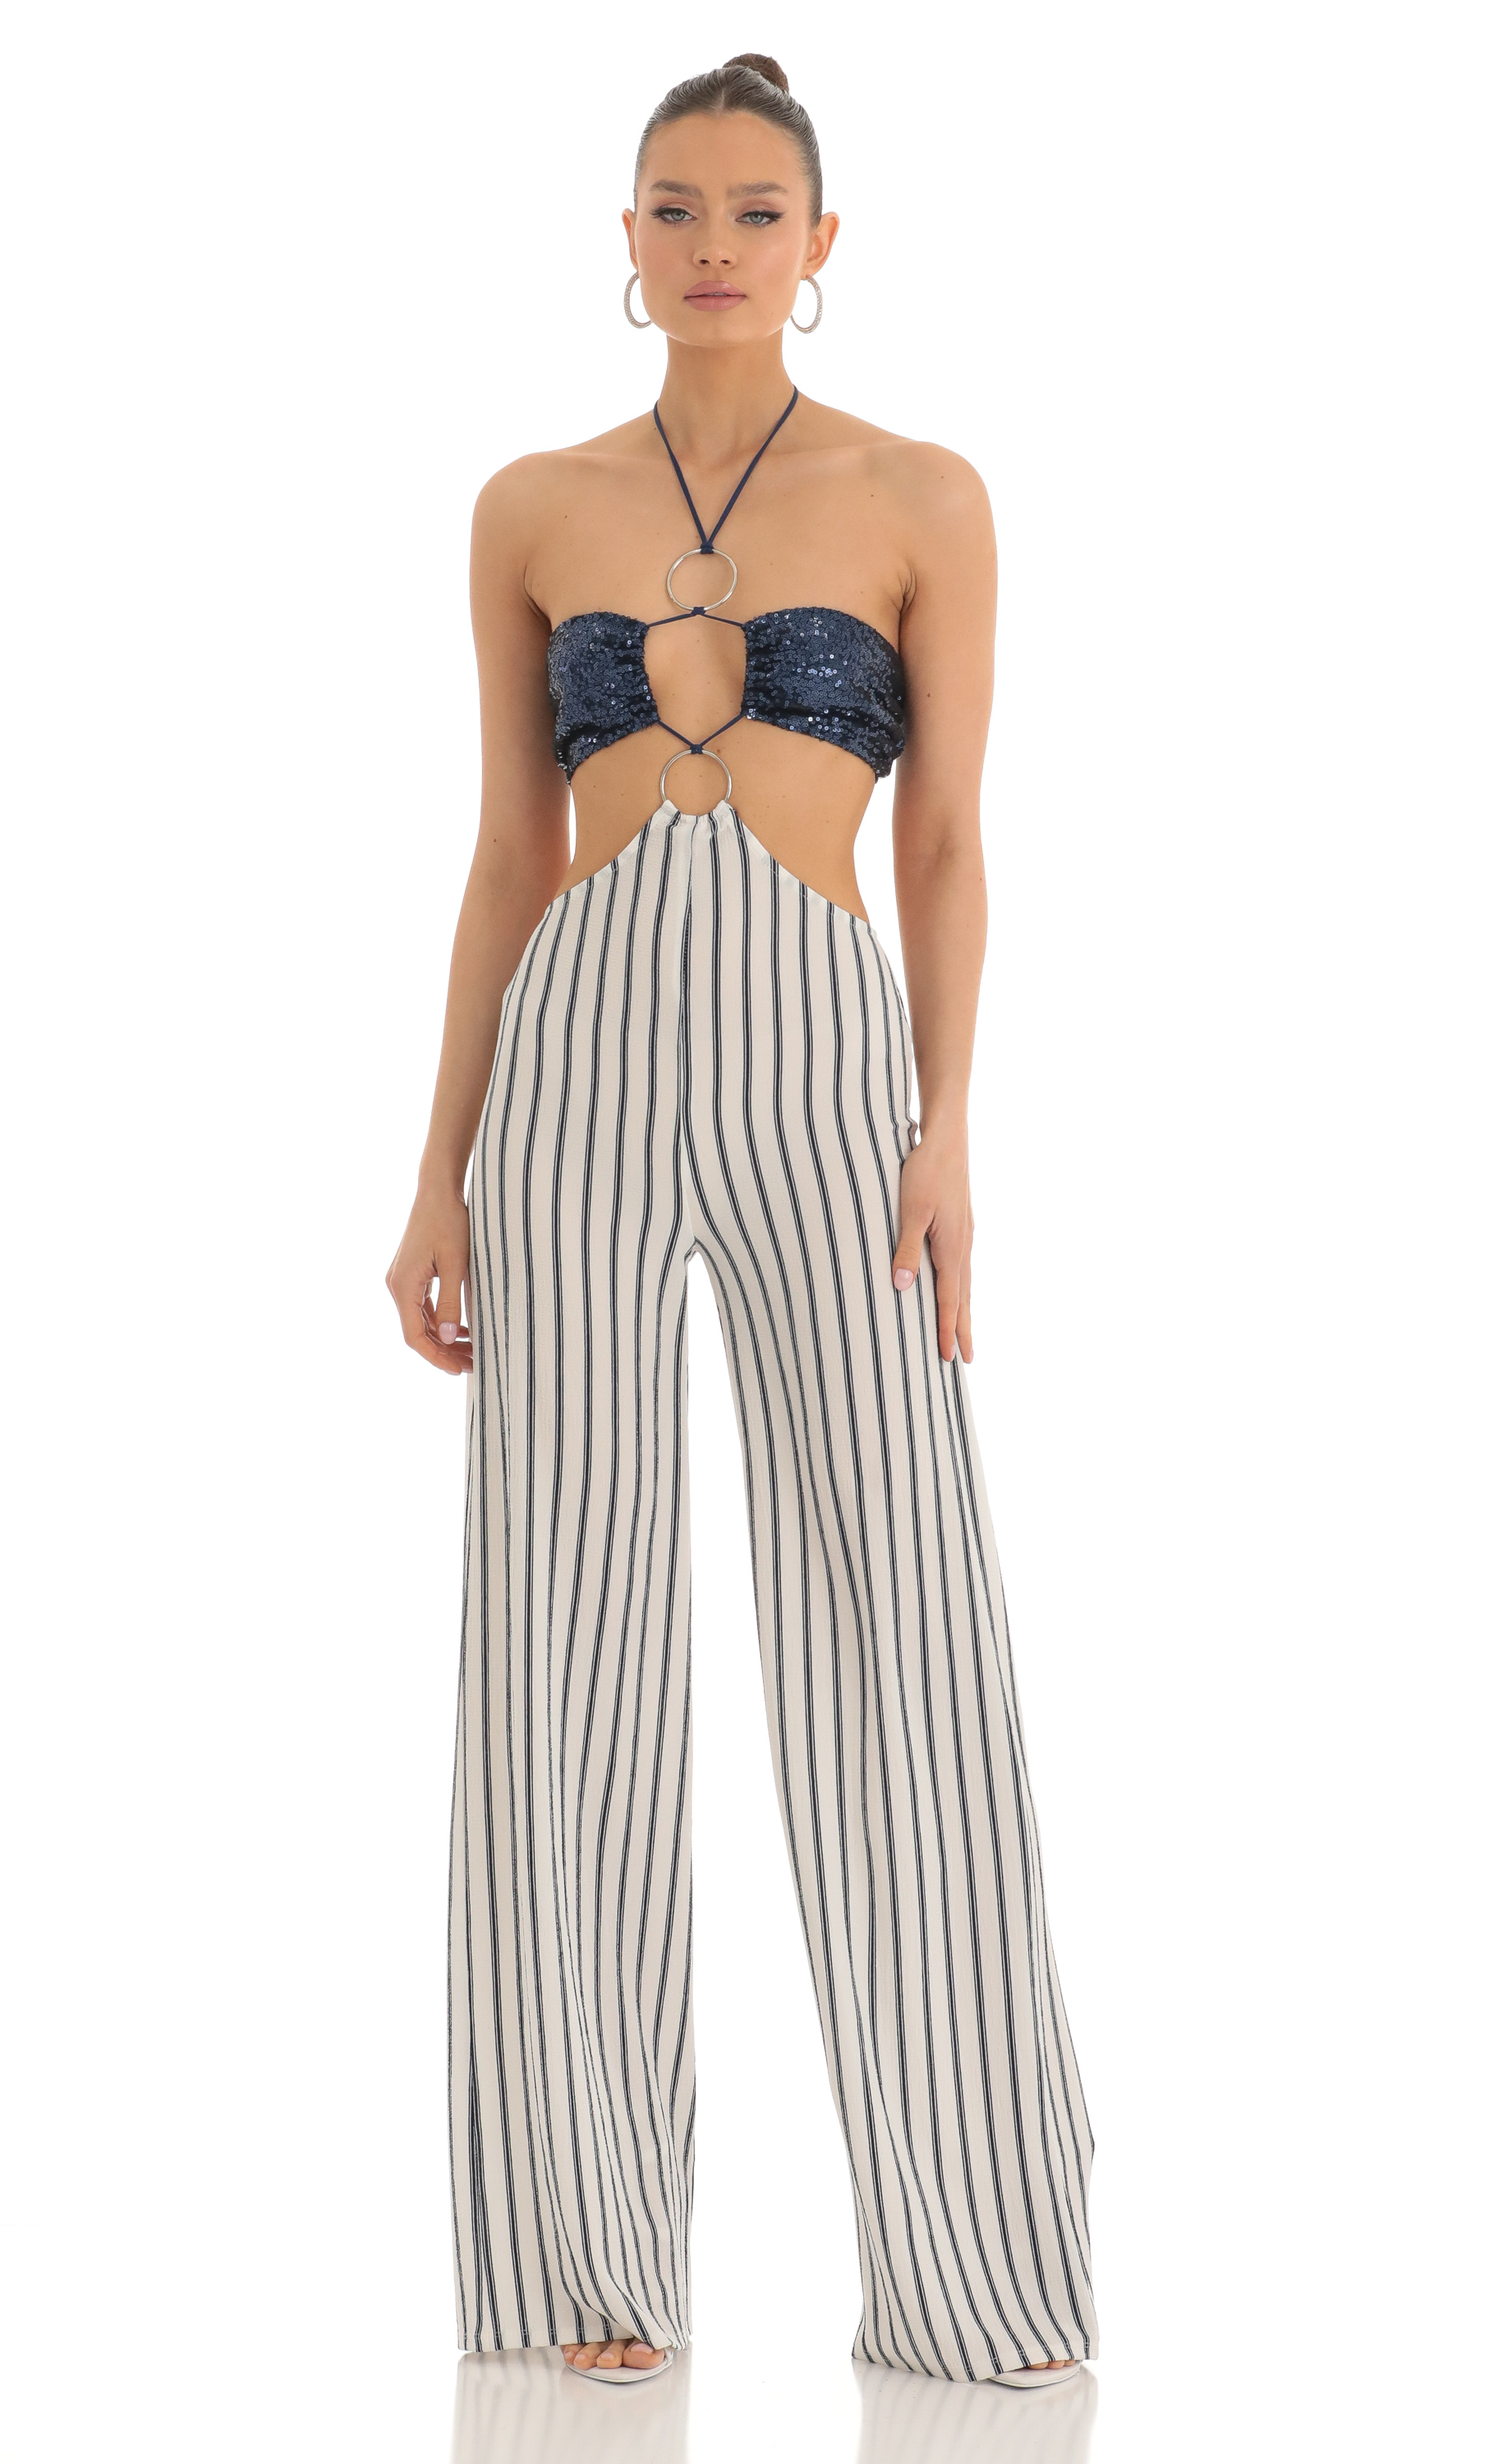 Sequin Halter Striped Jumpsuit in White and Navy